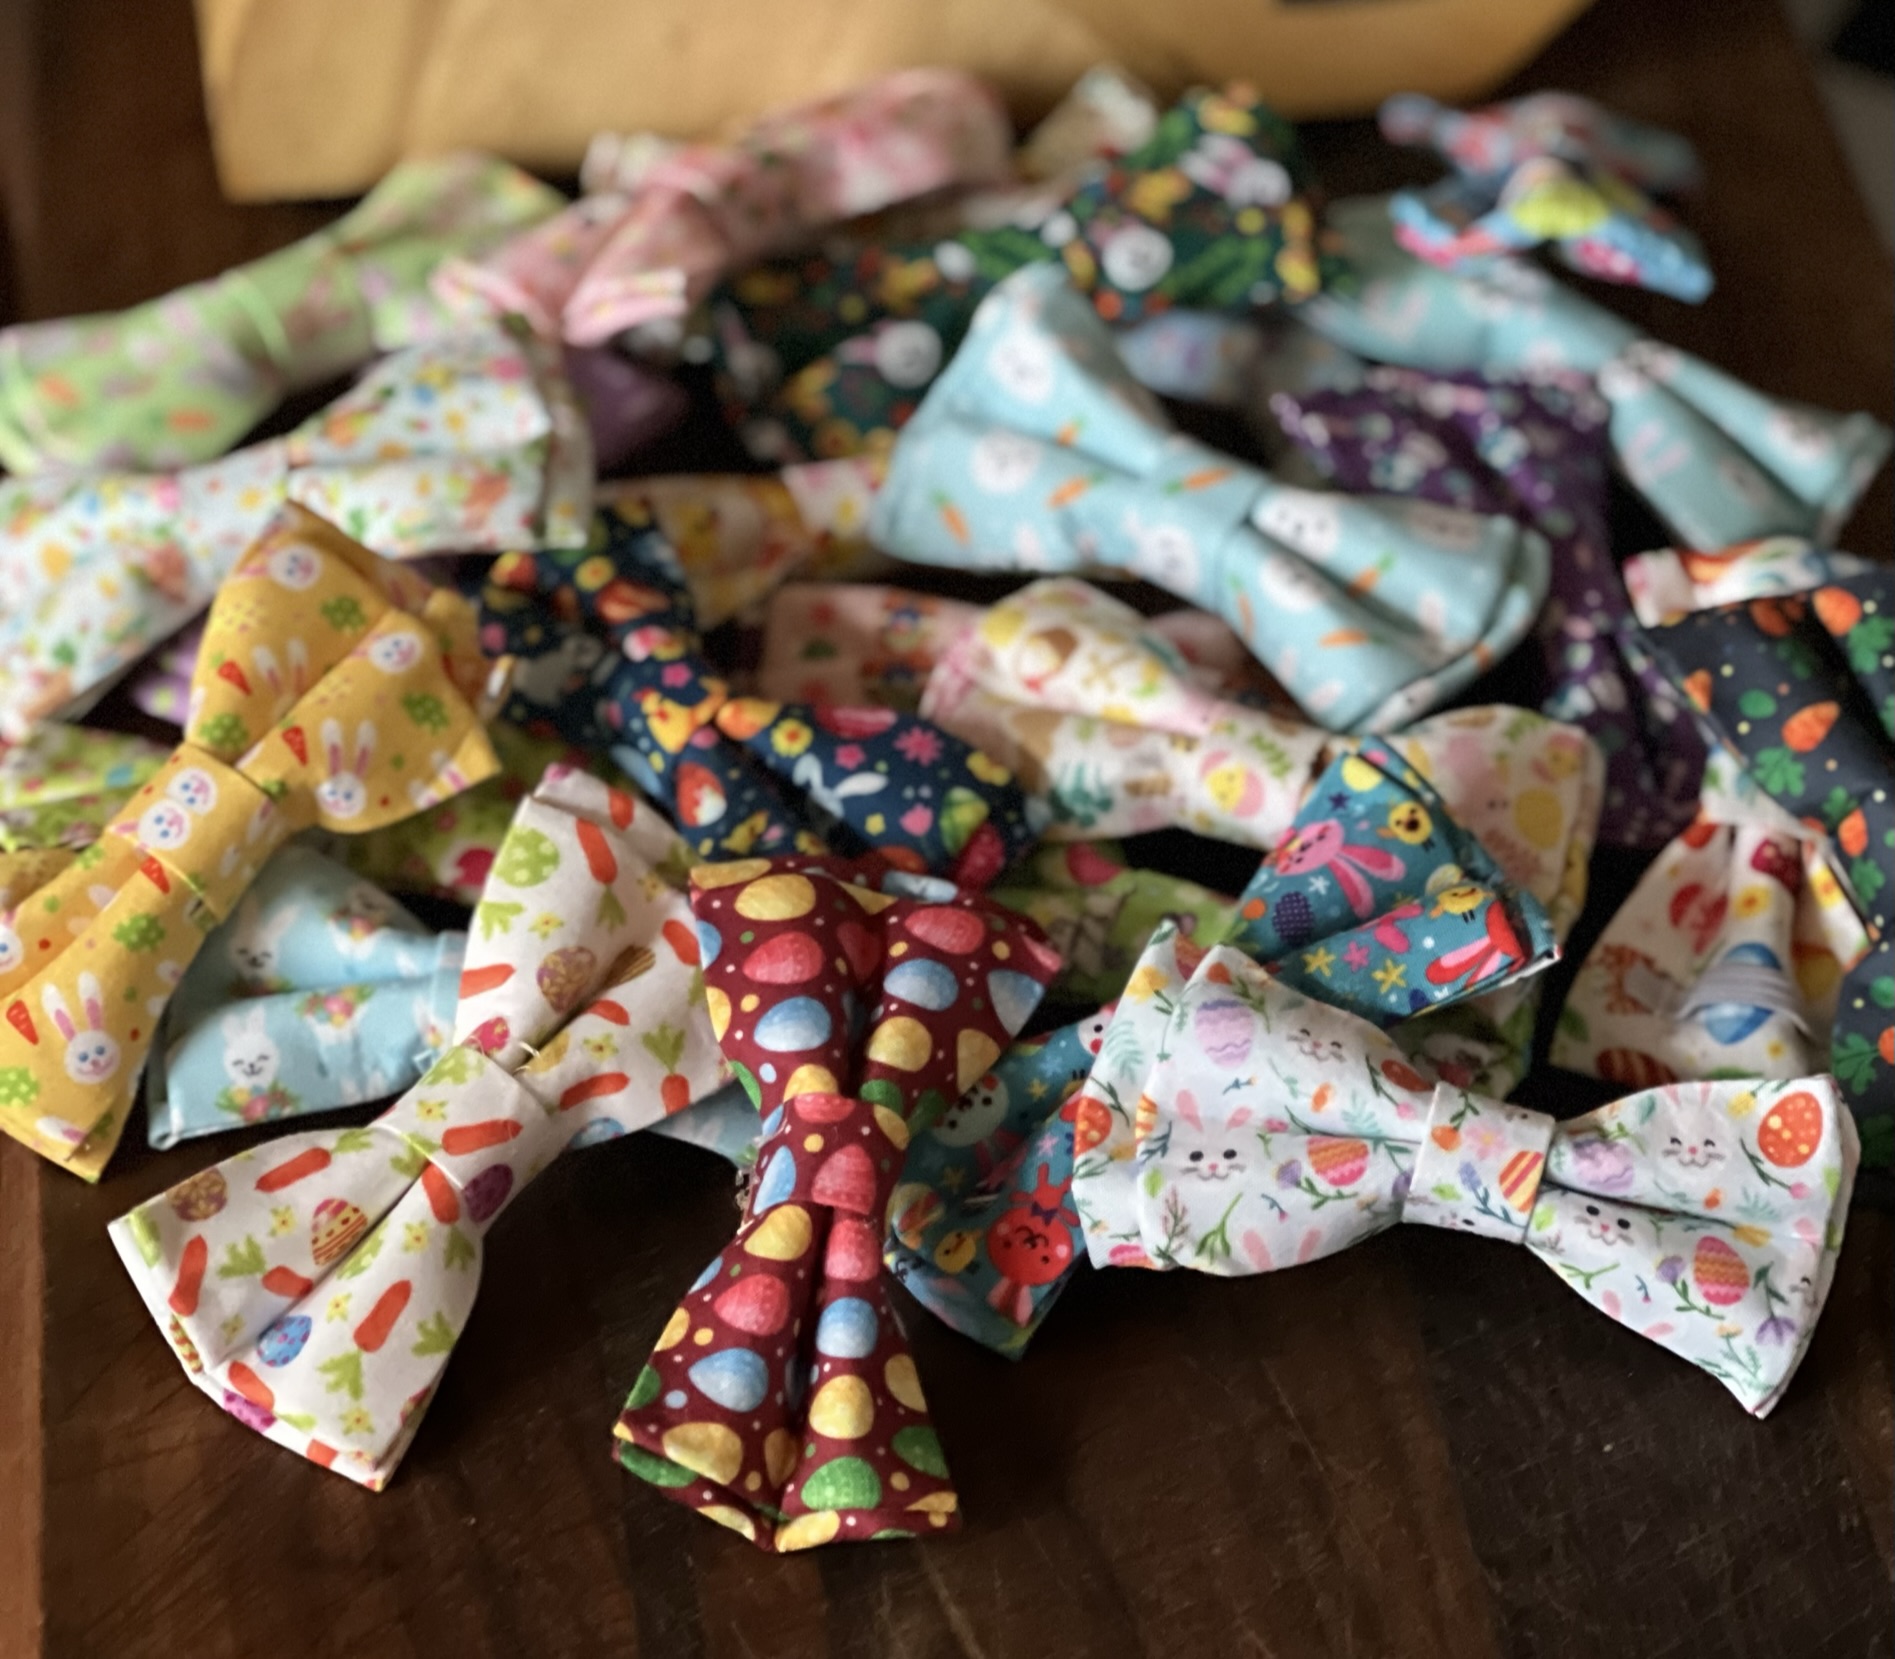 This Collar Bows - Dog or Cat with elastic loops - slide on is made with love by Treats By William! Shop more unique gift ideas today with Spots Initiatives, the best way to support creators.